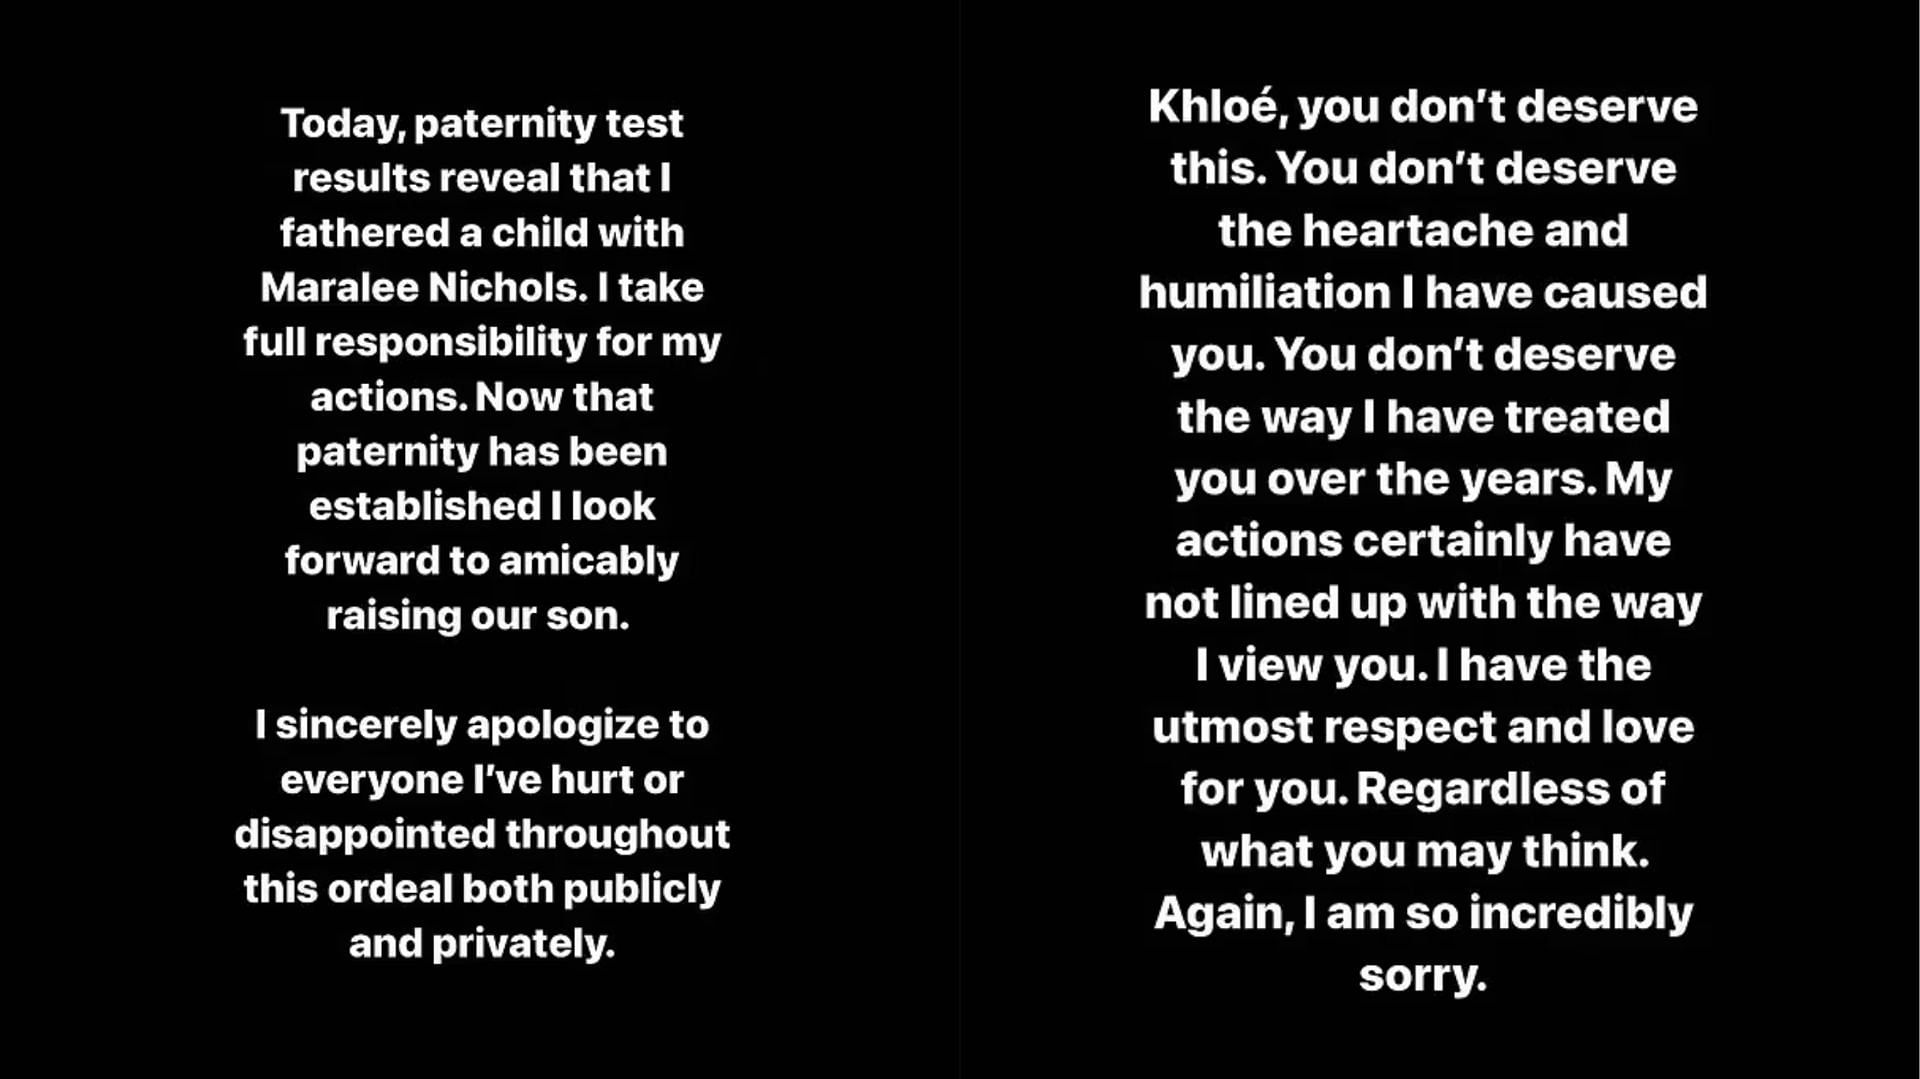 The NBA player also apologized publicly to his other baby mama Khlo&eacute; Kardashian (Image via Tristan Thompson/Instagram)